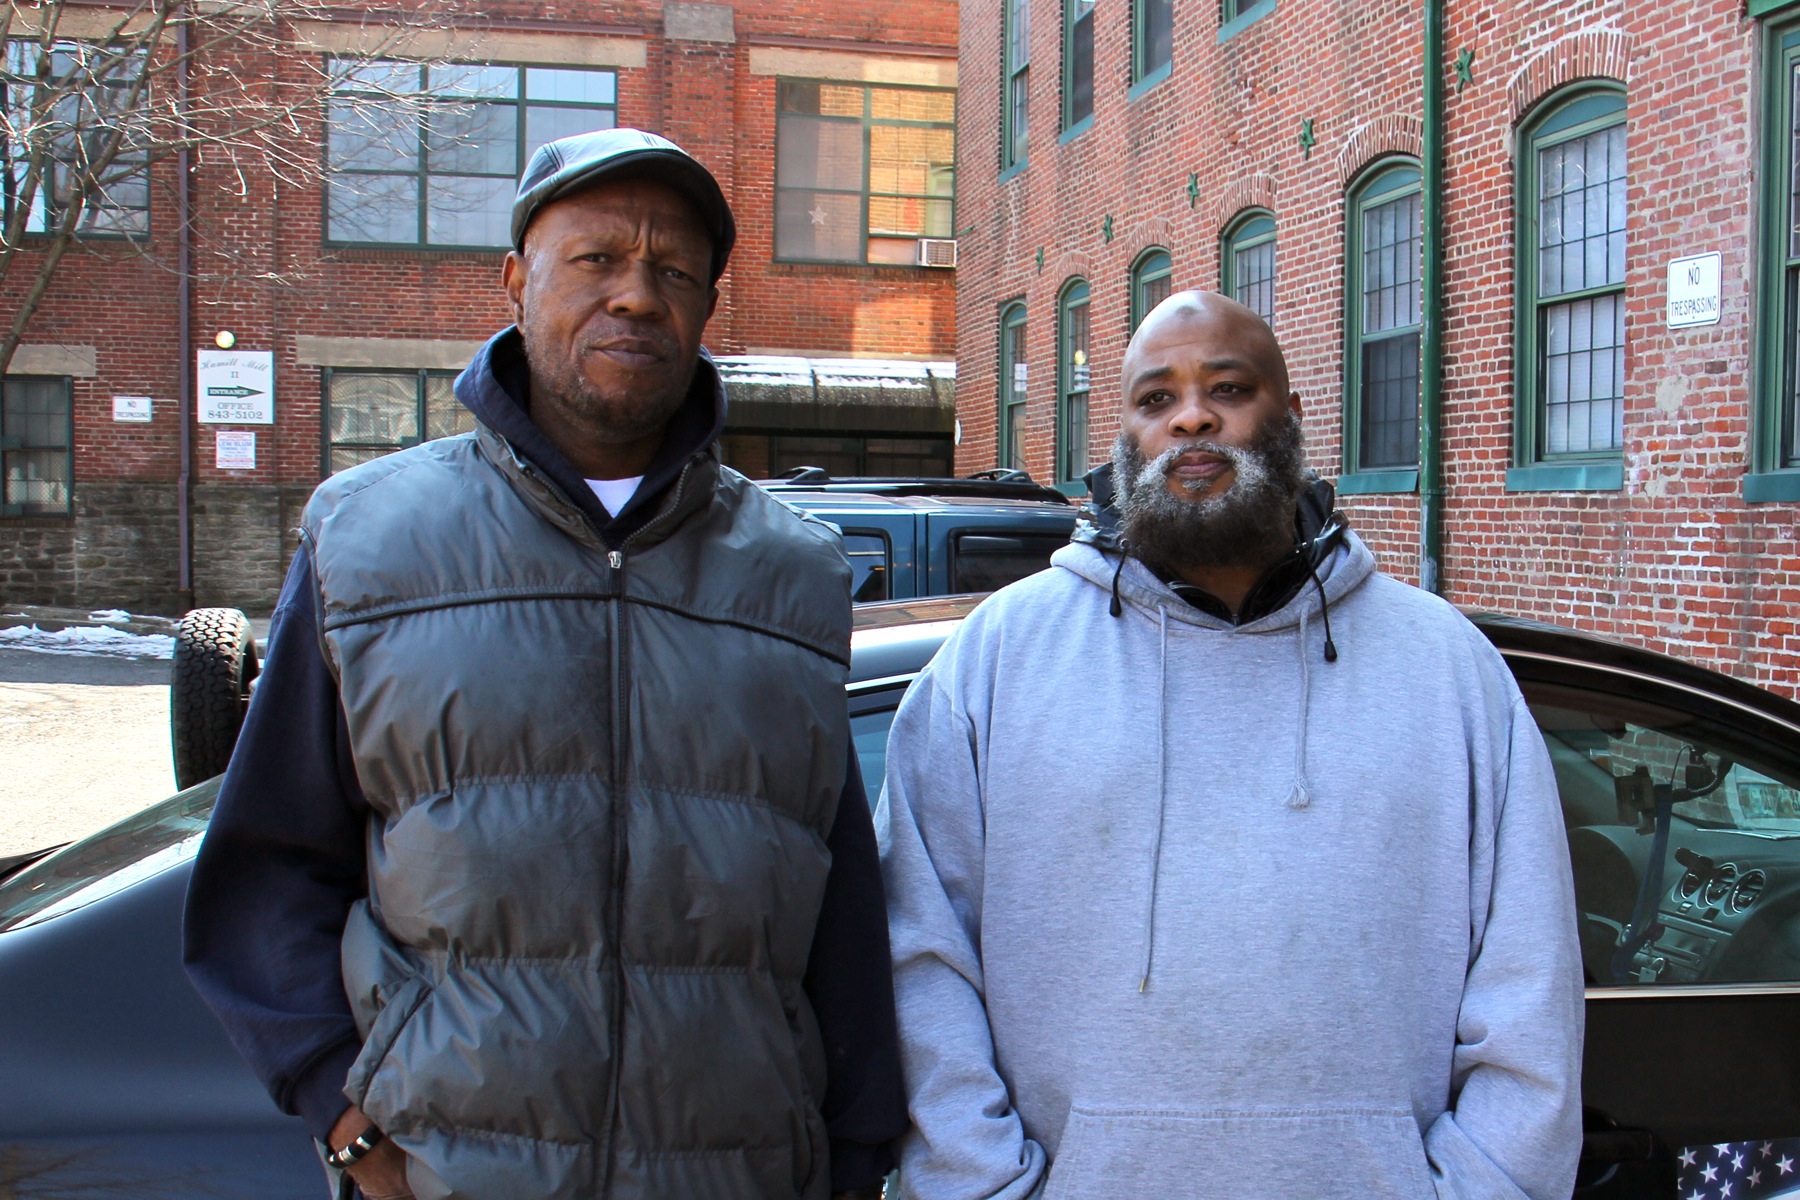 Brothers Tony Pointer (left) and Leroy Prince live in the Hamill Mill II apartments. Prince says he has to heat water on his stove for bathing. (Emma Lee/WHYY)